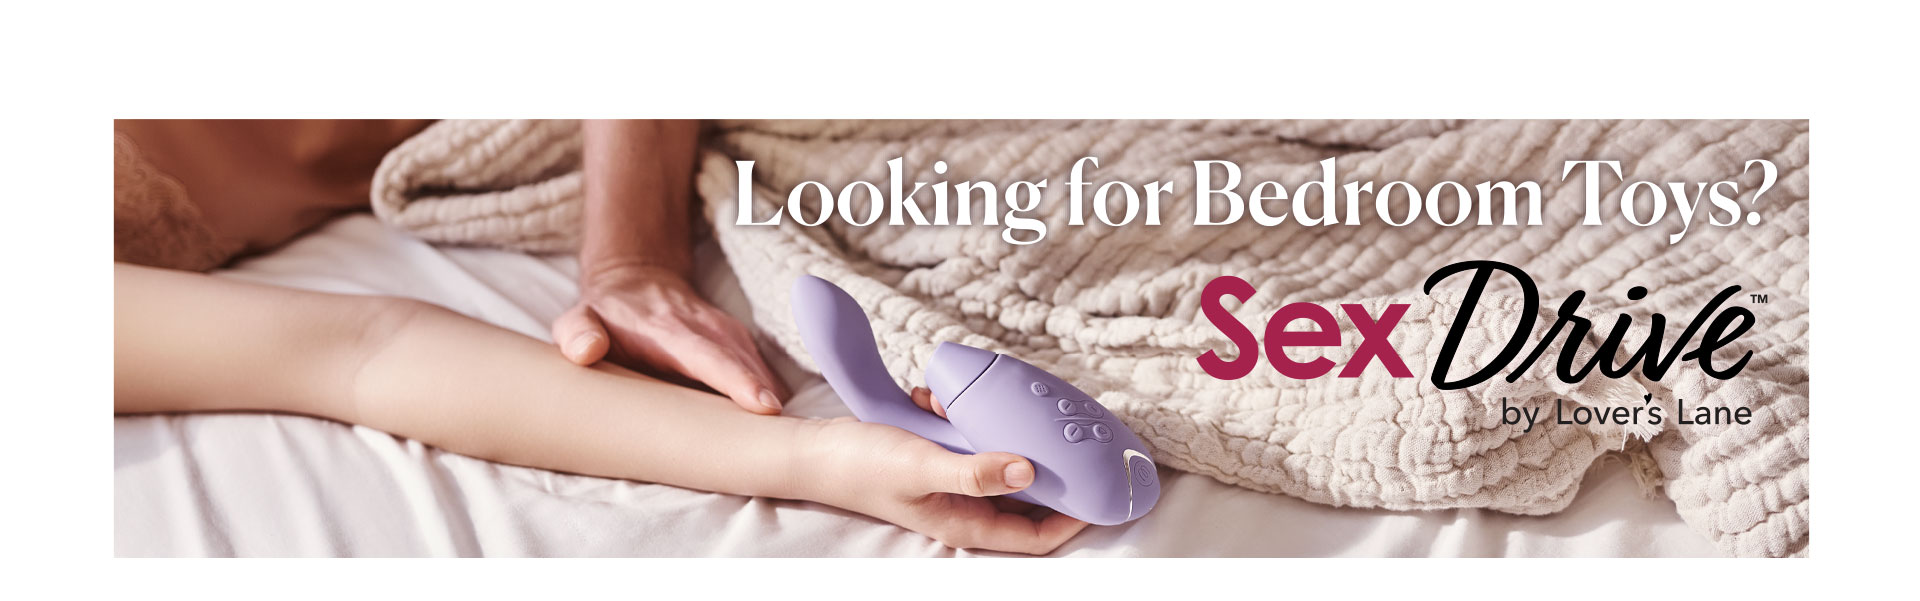 Looking for Bedroom Toys? Shop Sex Drive by Lover's Lane